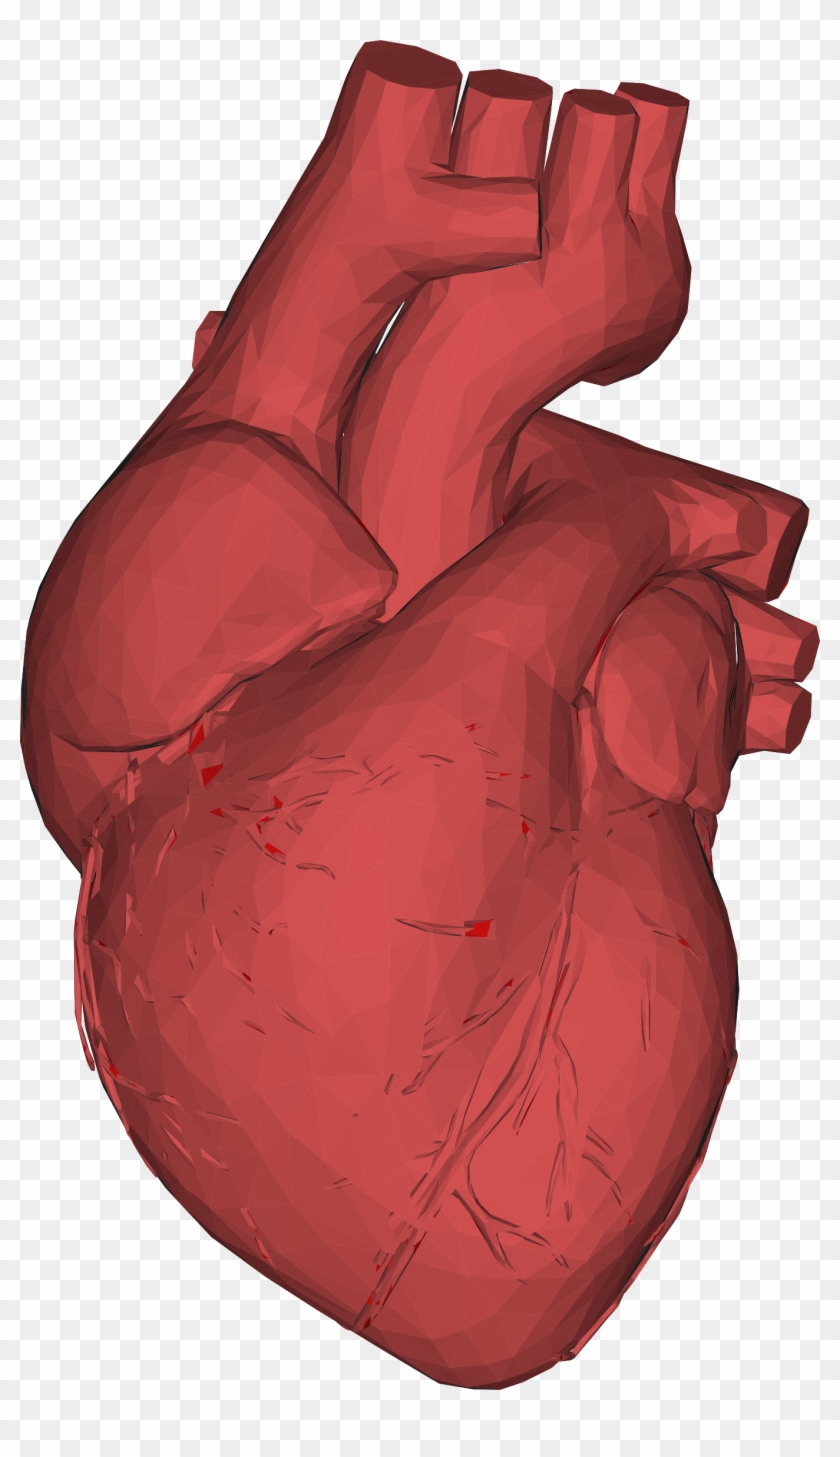 Low Poly 3d Heart Red Png Black And White - 3d Human Heart Images Png Clipart #2270354